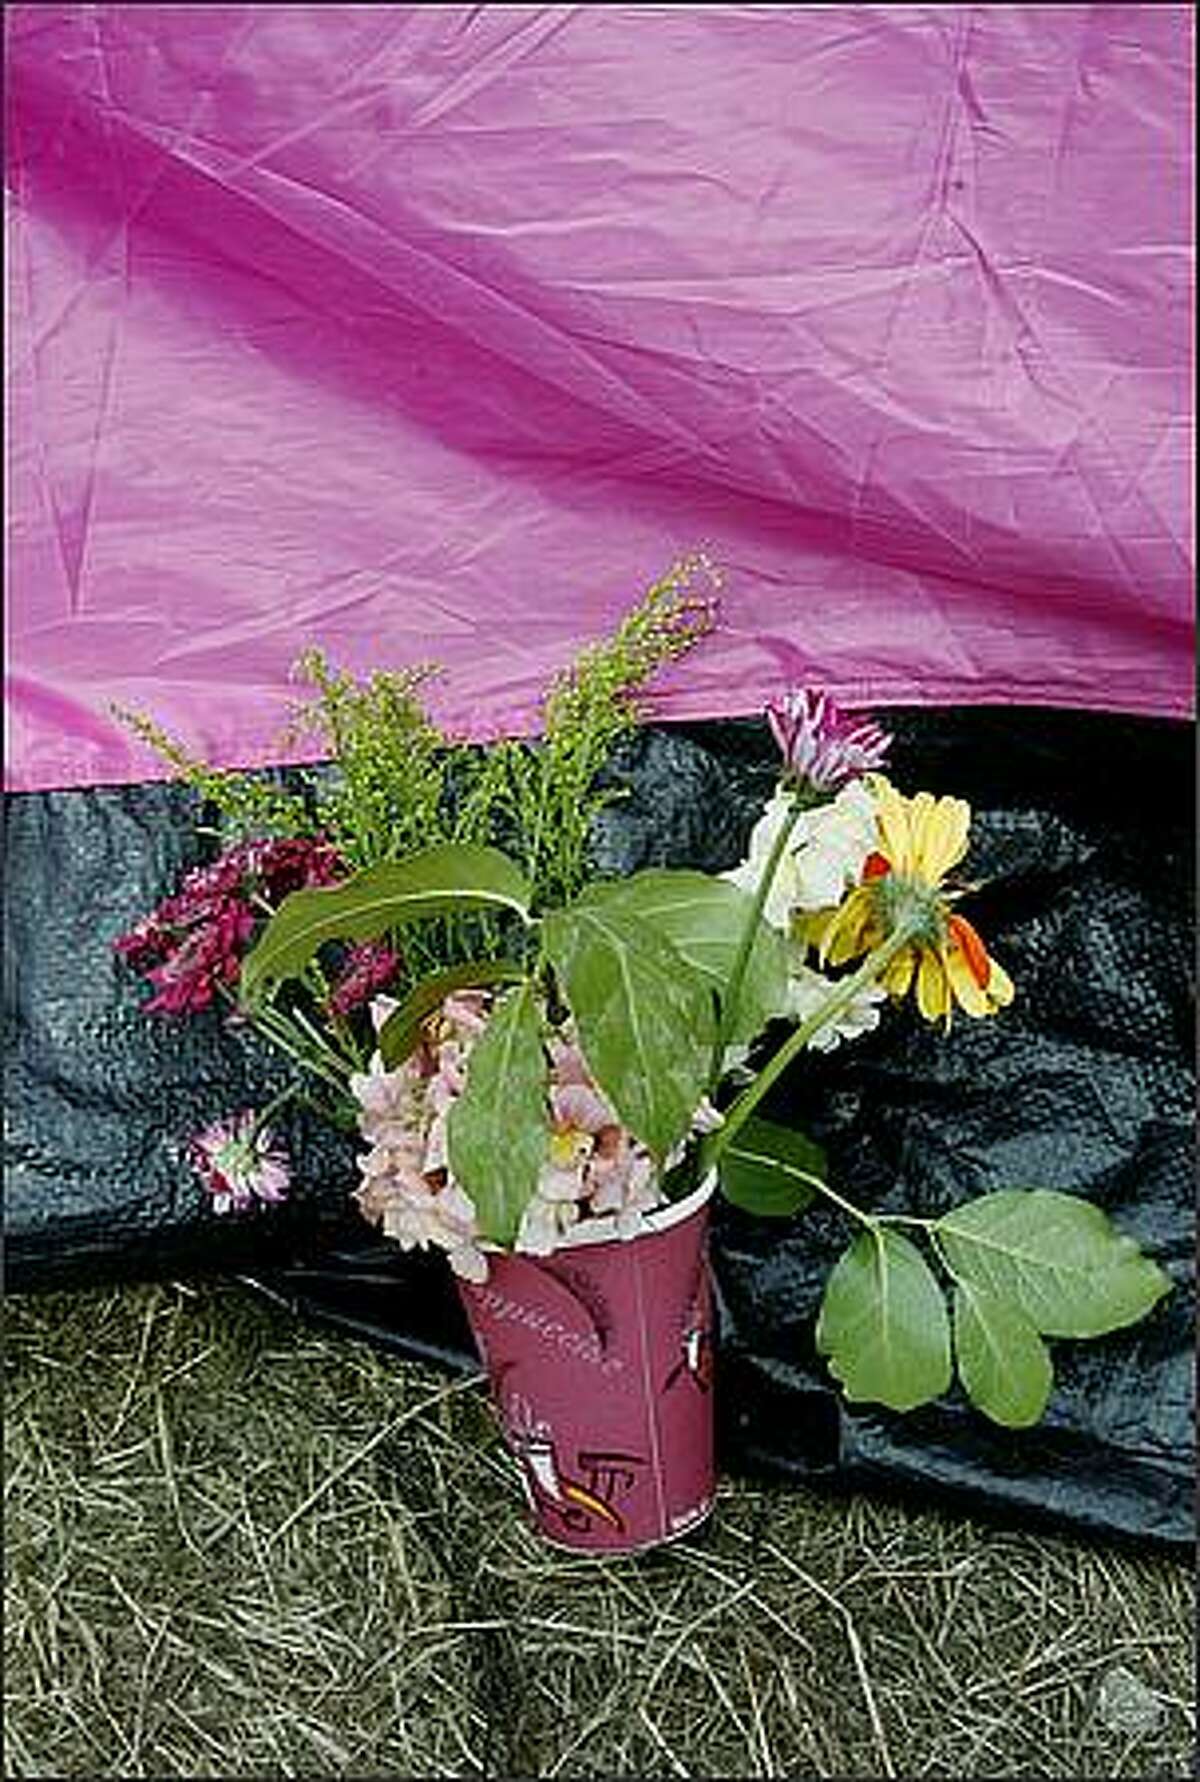 A bouquet of flowers was left propped against one of the pink tents that made up the "Nickelsville" homeless encampment.